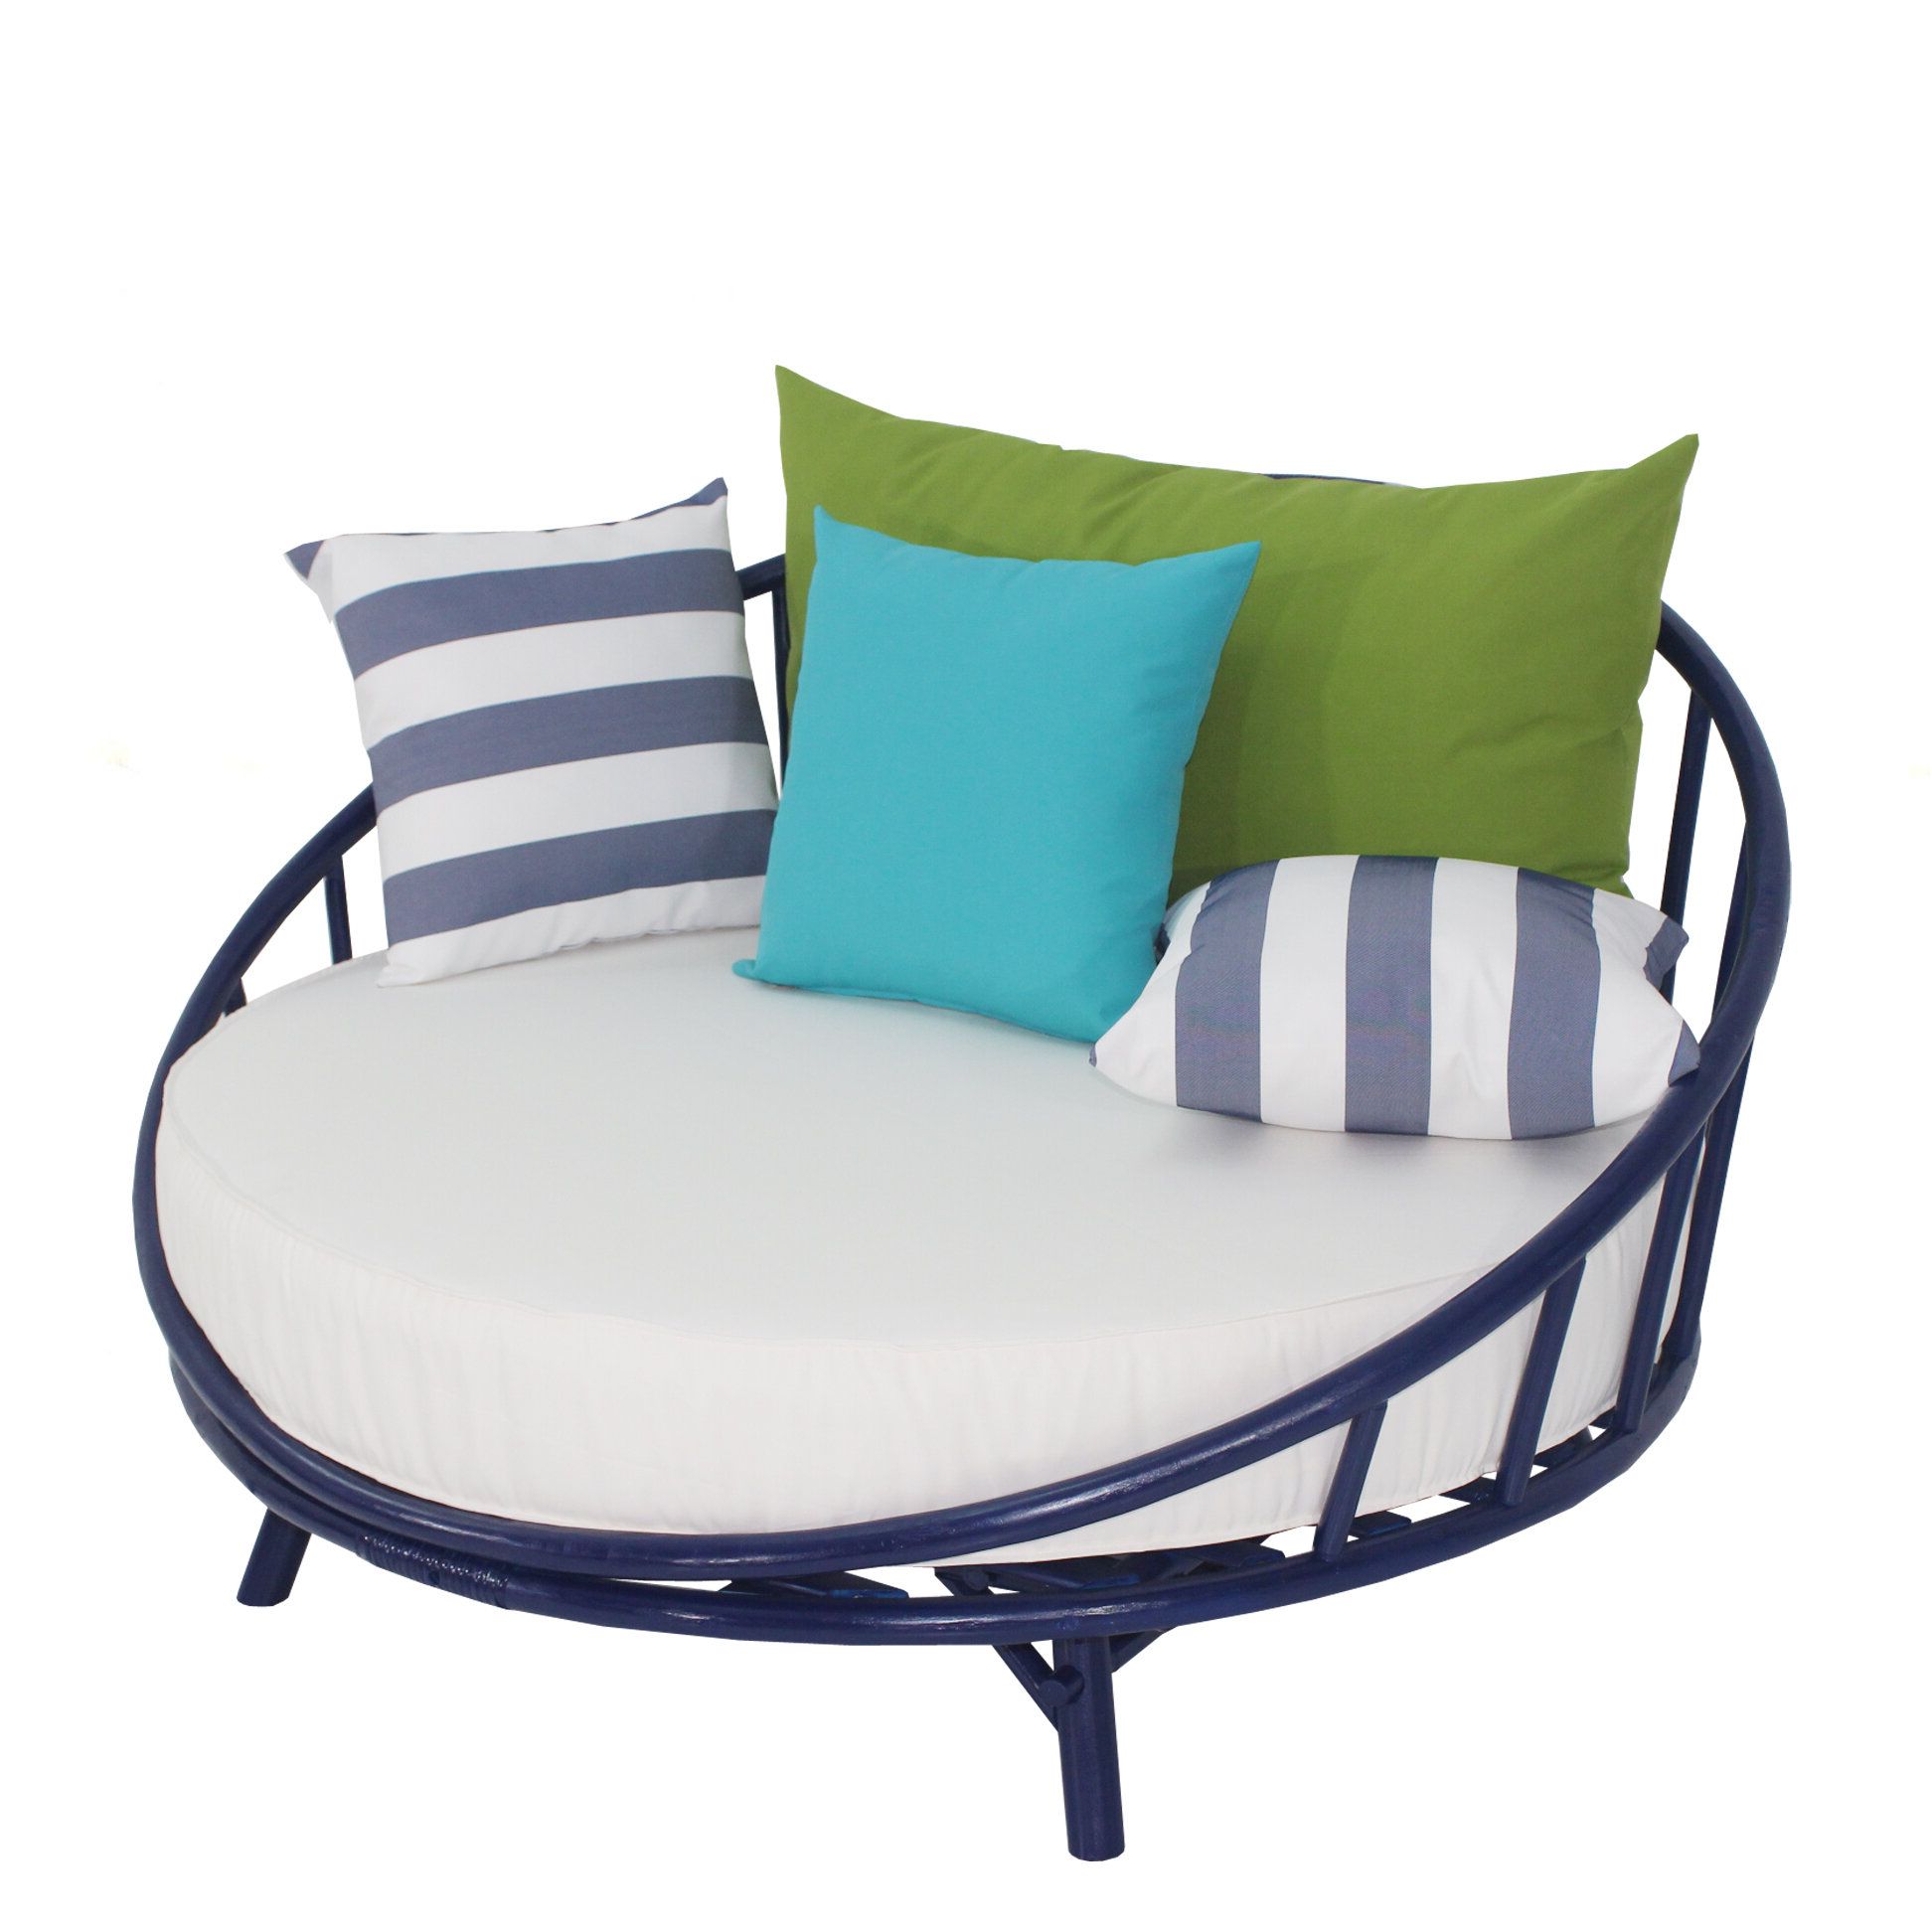 Olu Bamboo Large Round Patio Daybed With Cushions Regarding Favorite Naperville Patio Daybeds With Cushion (View 6 of 25)